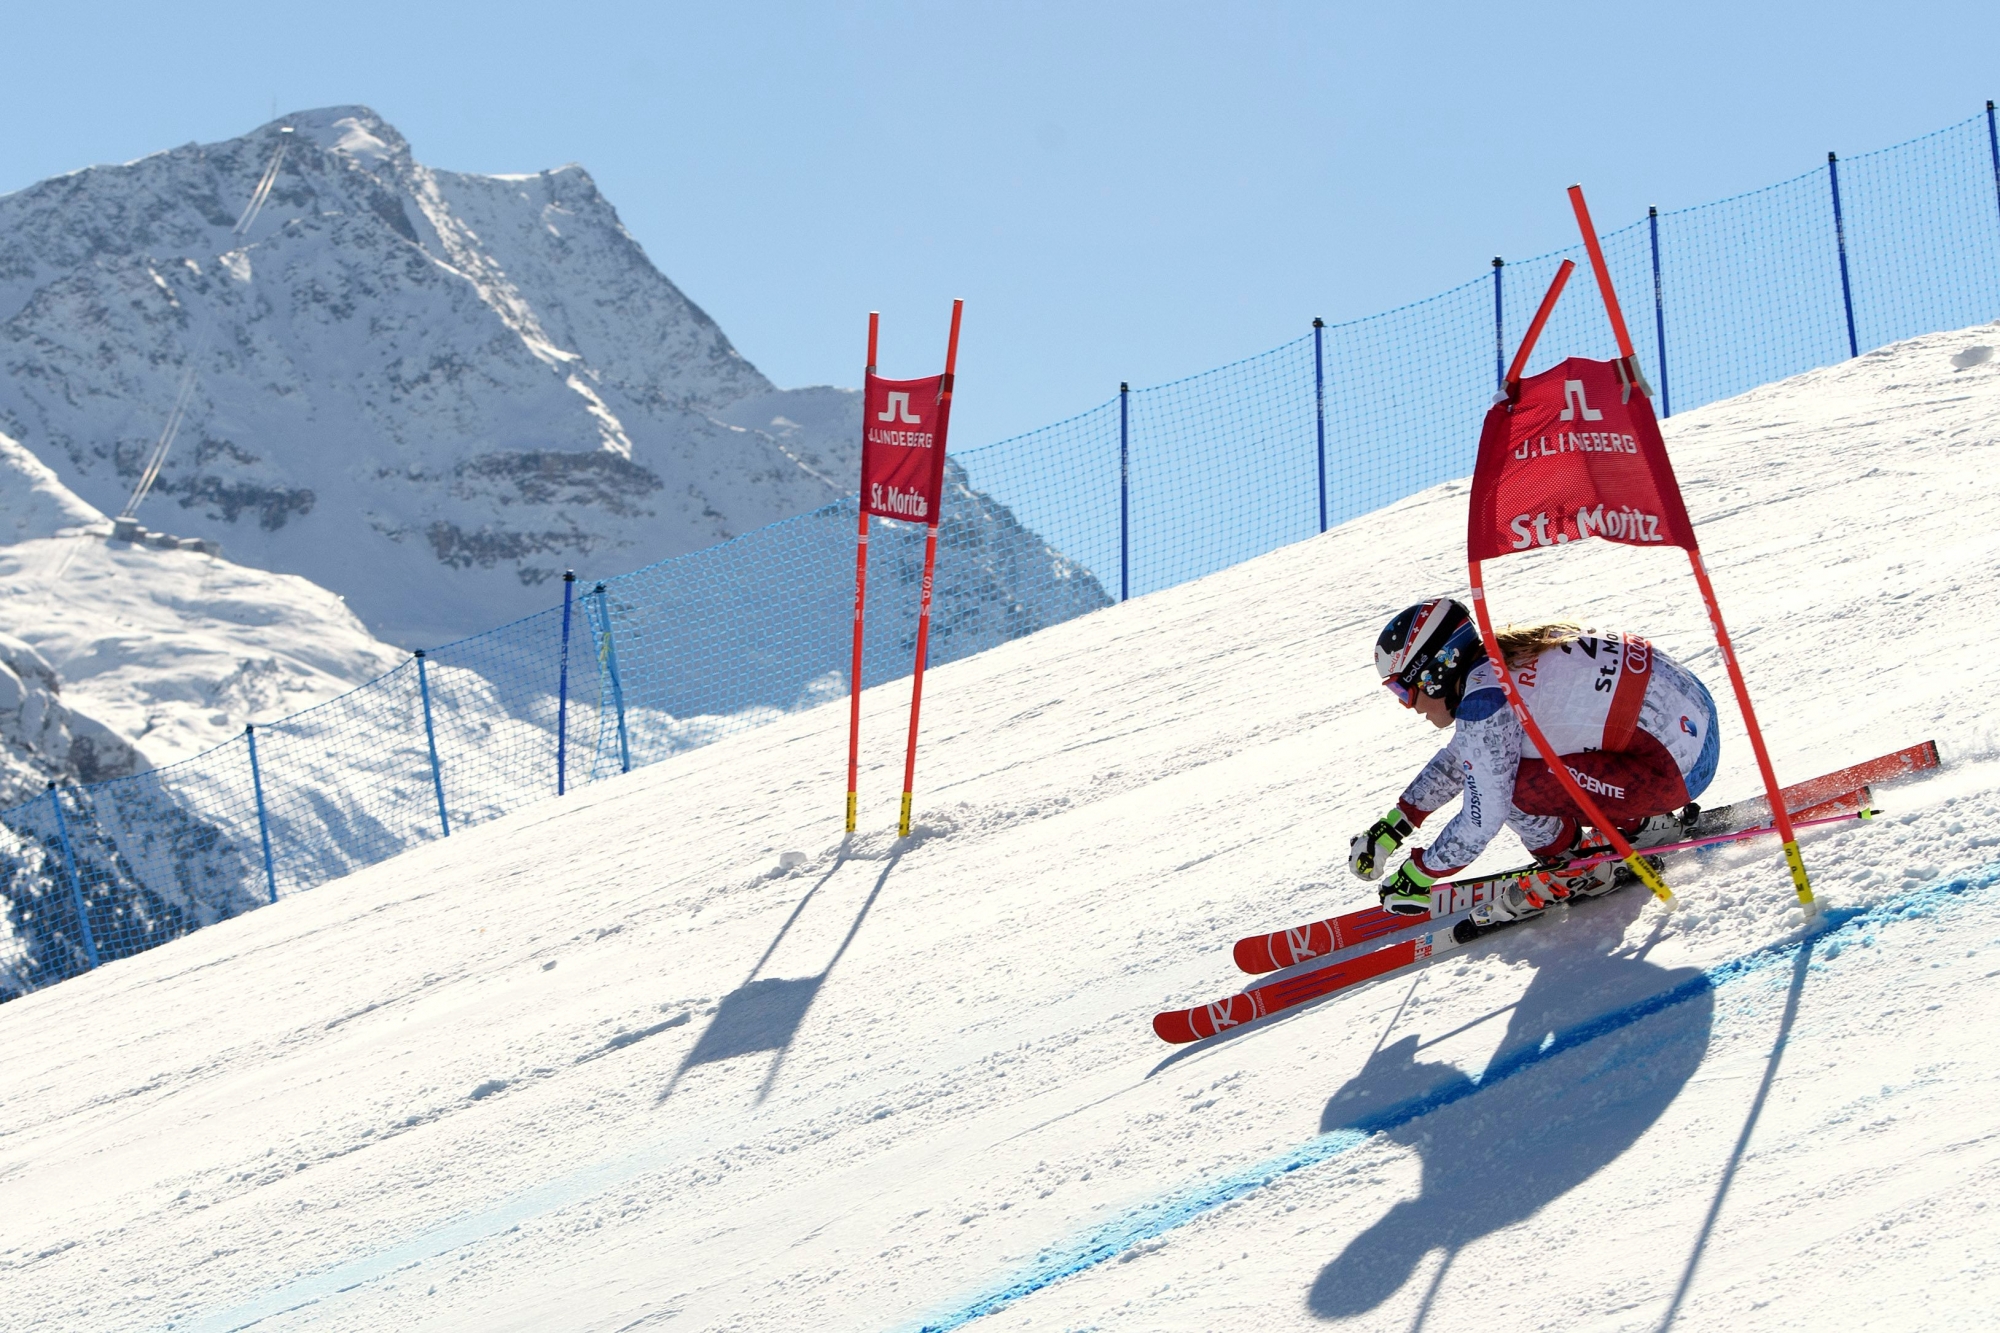 Melanie Meillard, of Switzerland, competes during the second run of the women's Giant Slalom race at the 2017 FIS Alpine Skiing World Championships in St. Moritz, Switzerland, Thursday, February 16, 2017. (KEYSTONE/Jean-Christophe Bott) SWITZERLAND ALPINE SKIING WORLDS WOMEN GIANT SLALOM